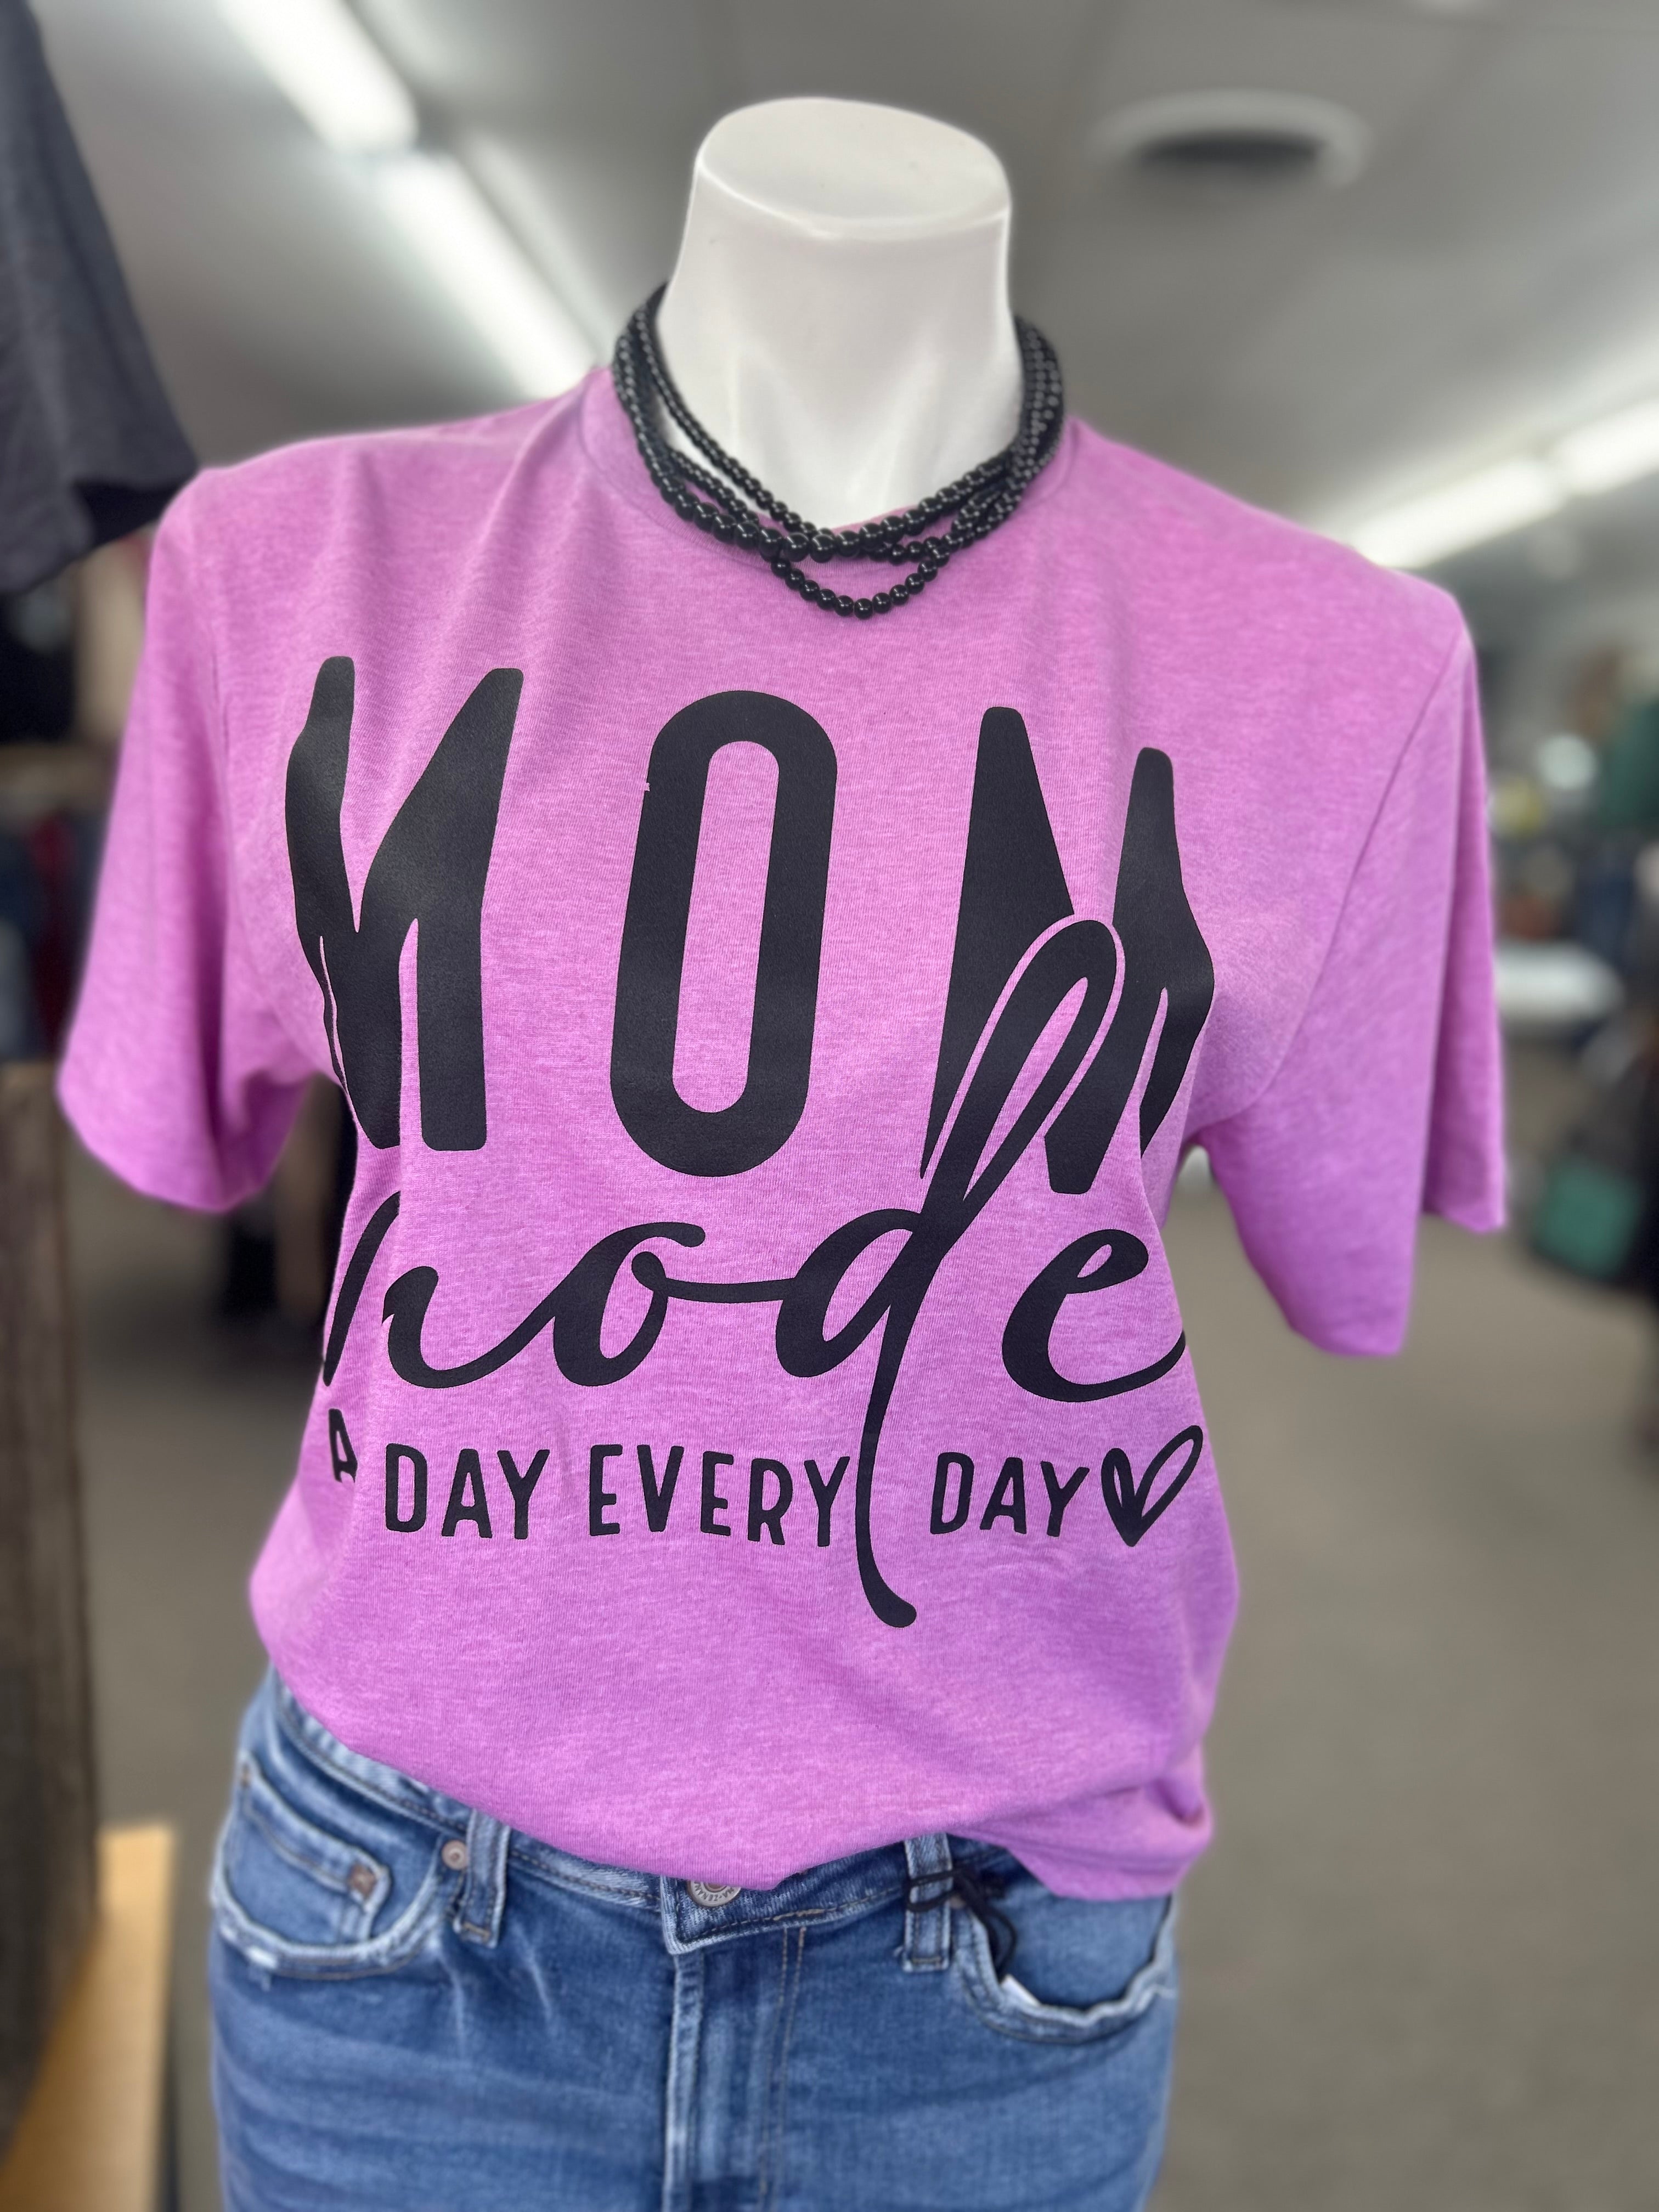 Mom mode all day everyday tee